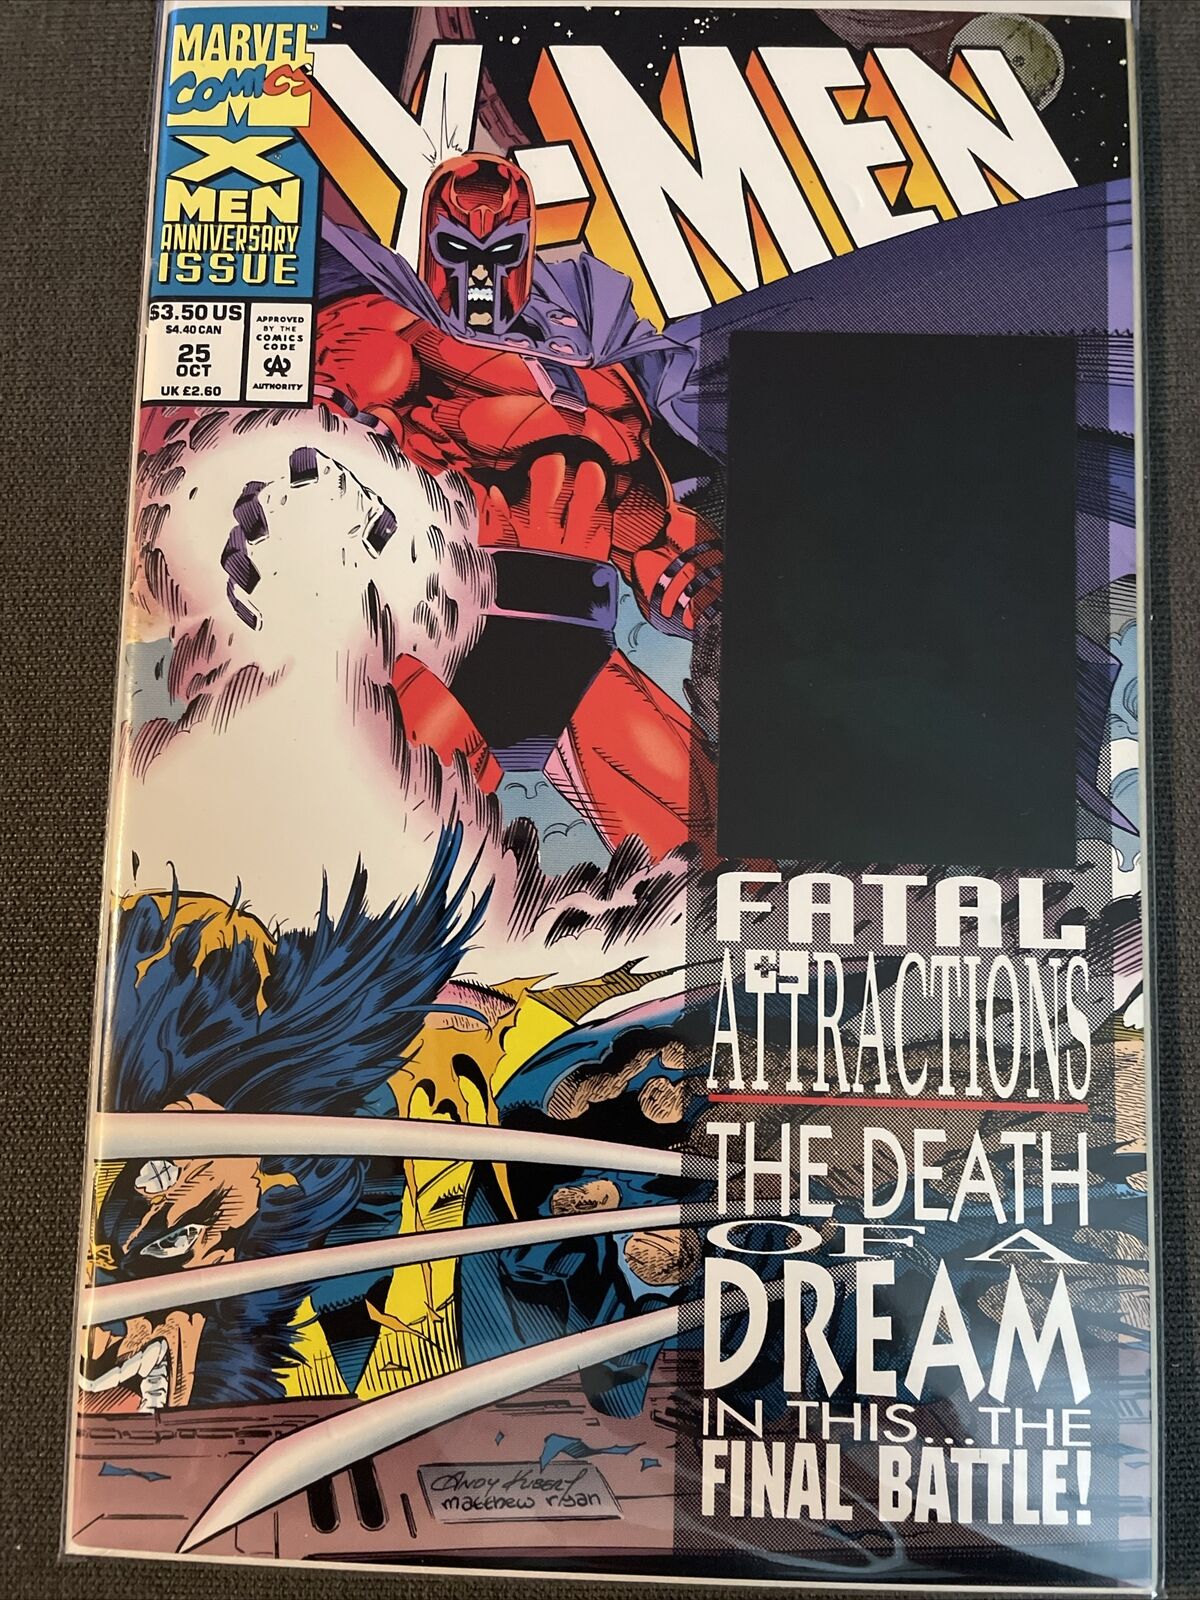 Marvel - X-MEN #25 (Great Condition) bagged and boarded